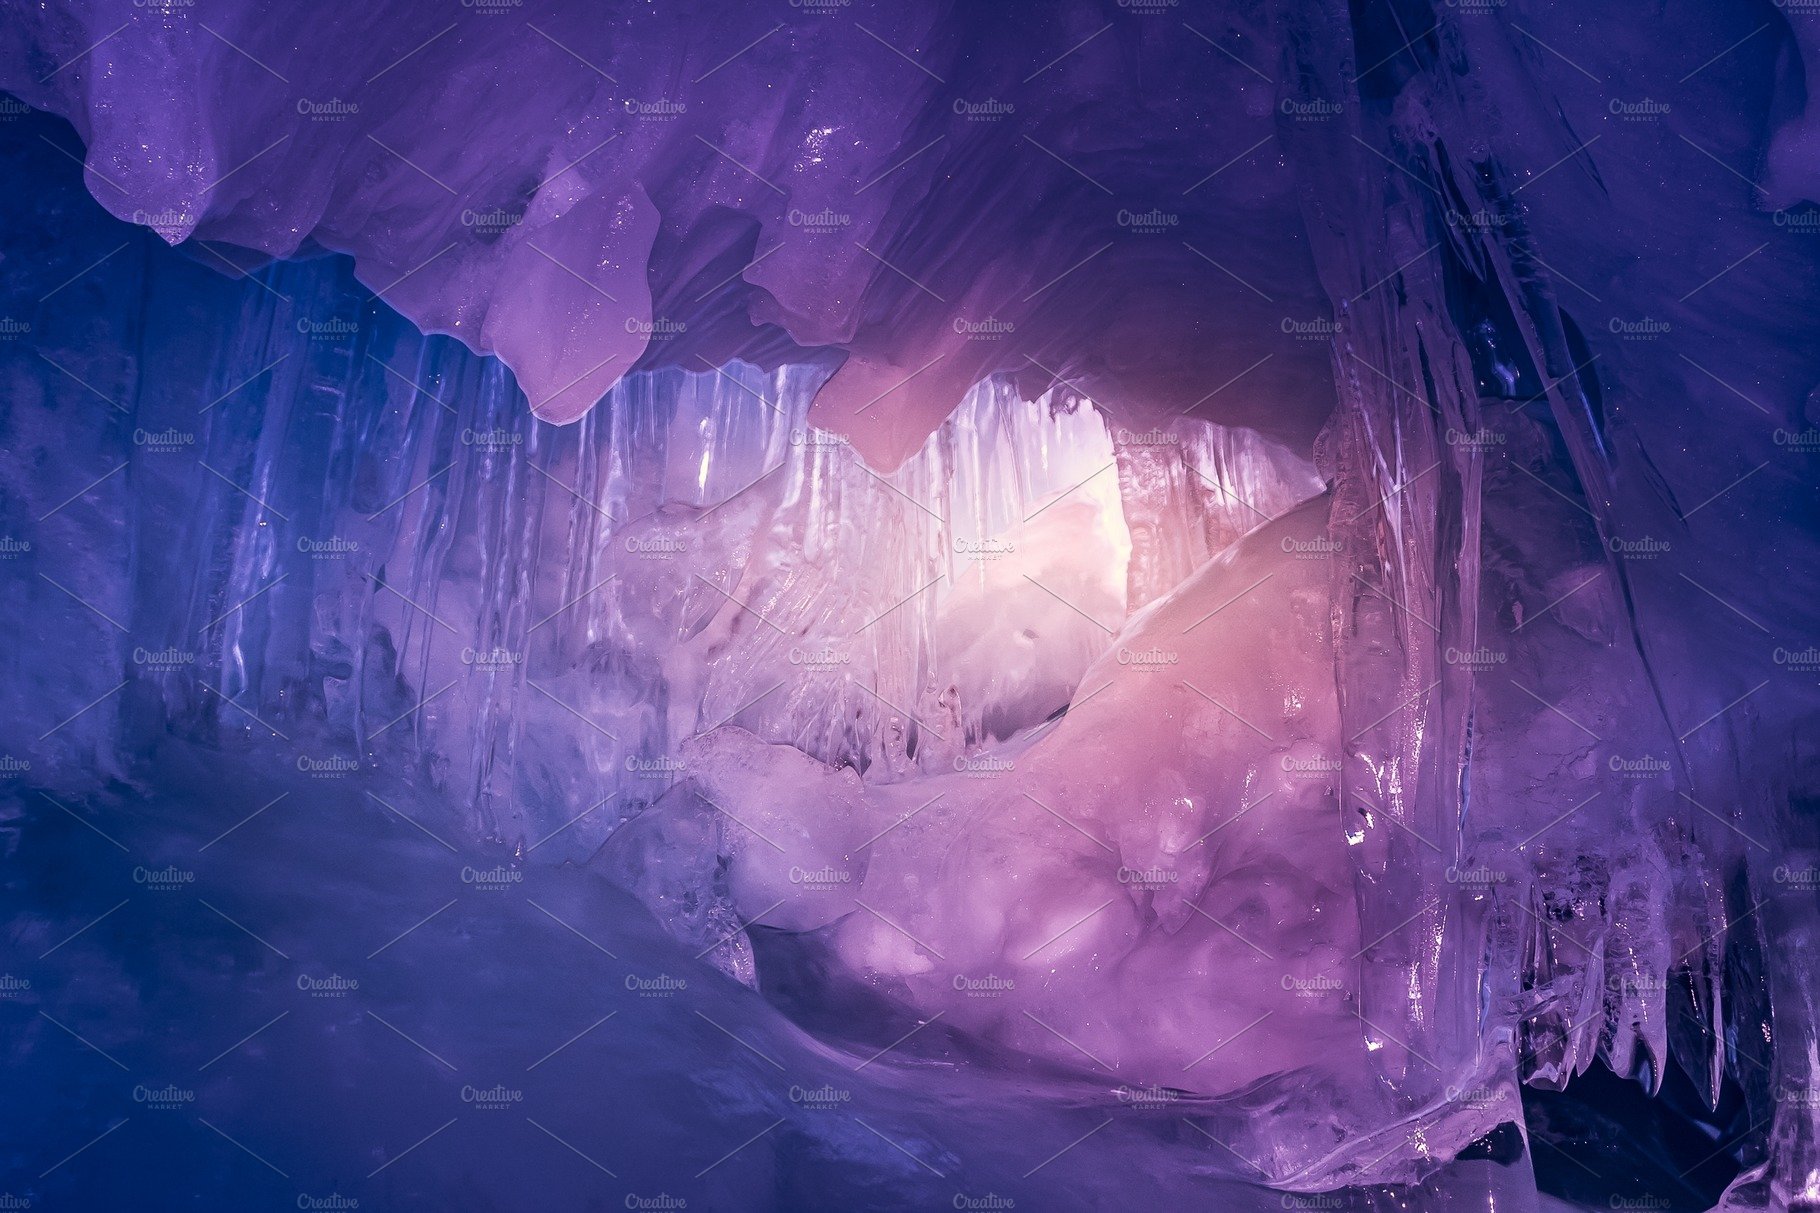 Violet Ice cave in Antarctica cover image.